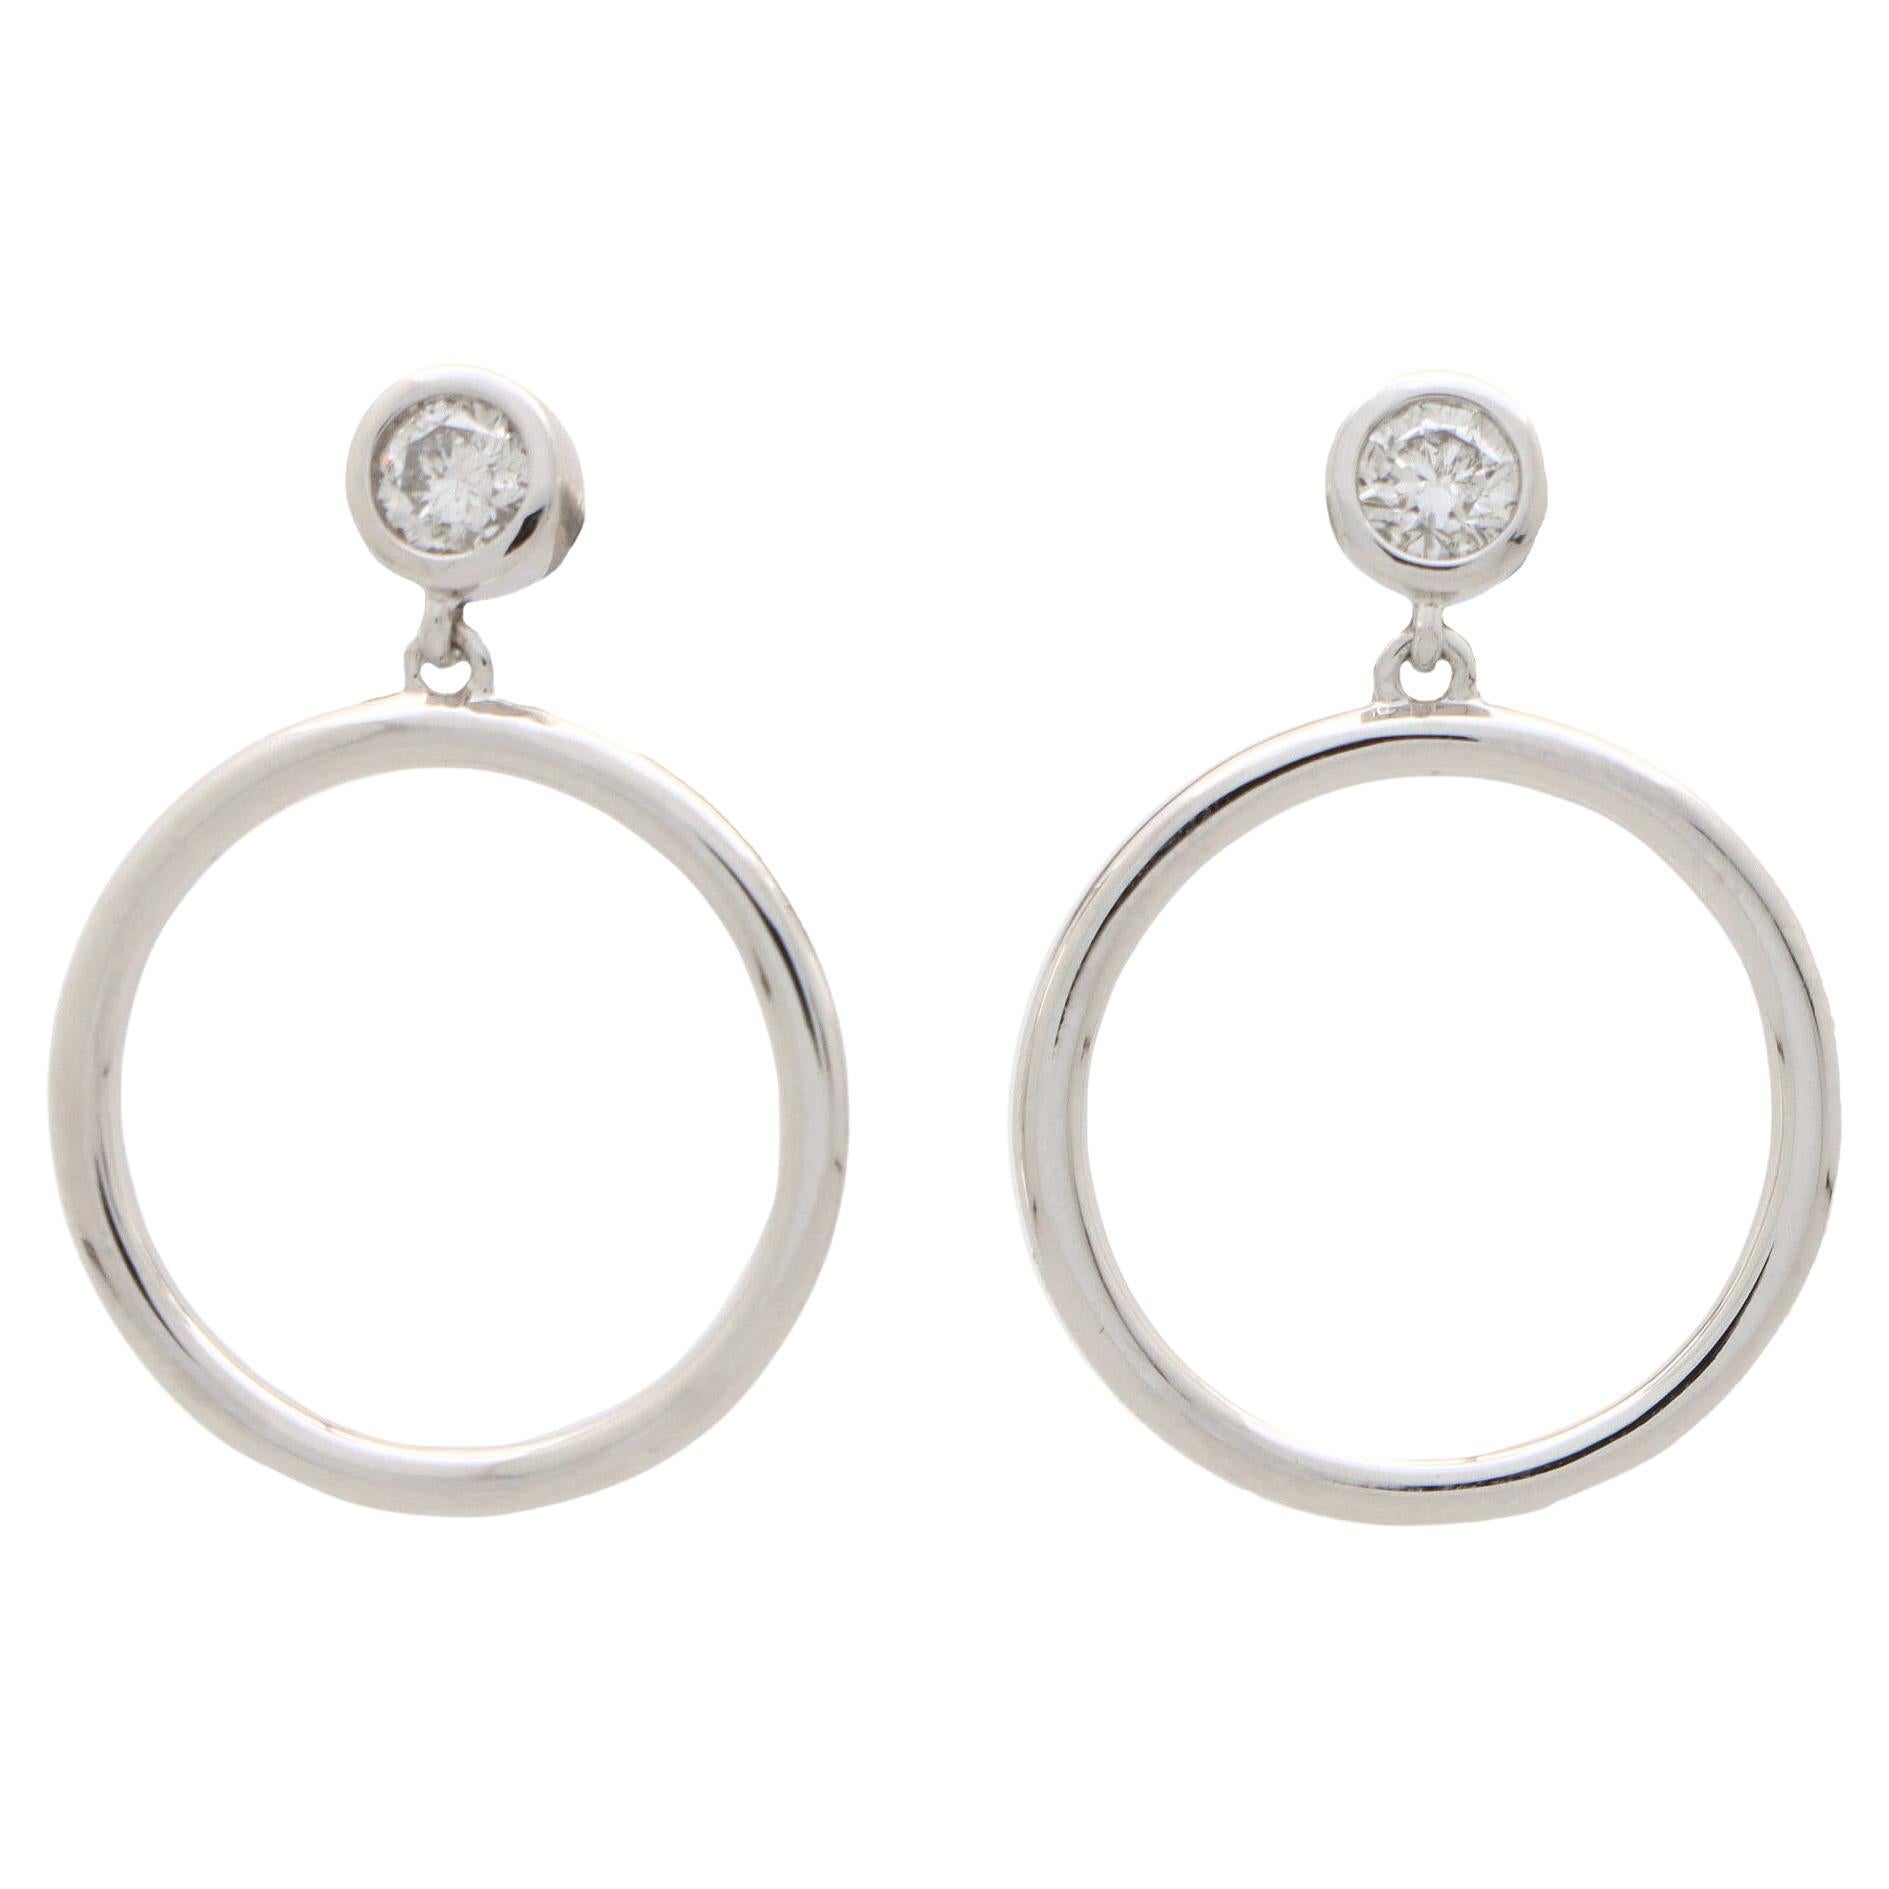  Contemporary Diamond Circle Drop Earrings Set in 14k White Gold For Sale